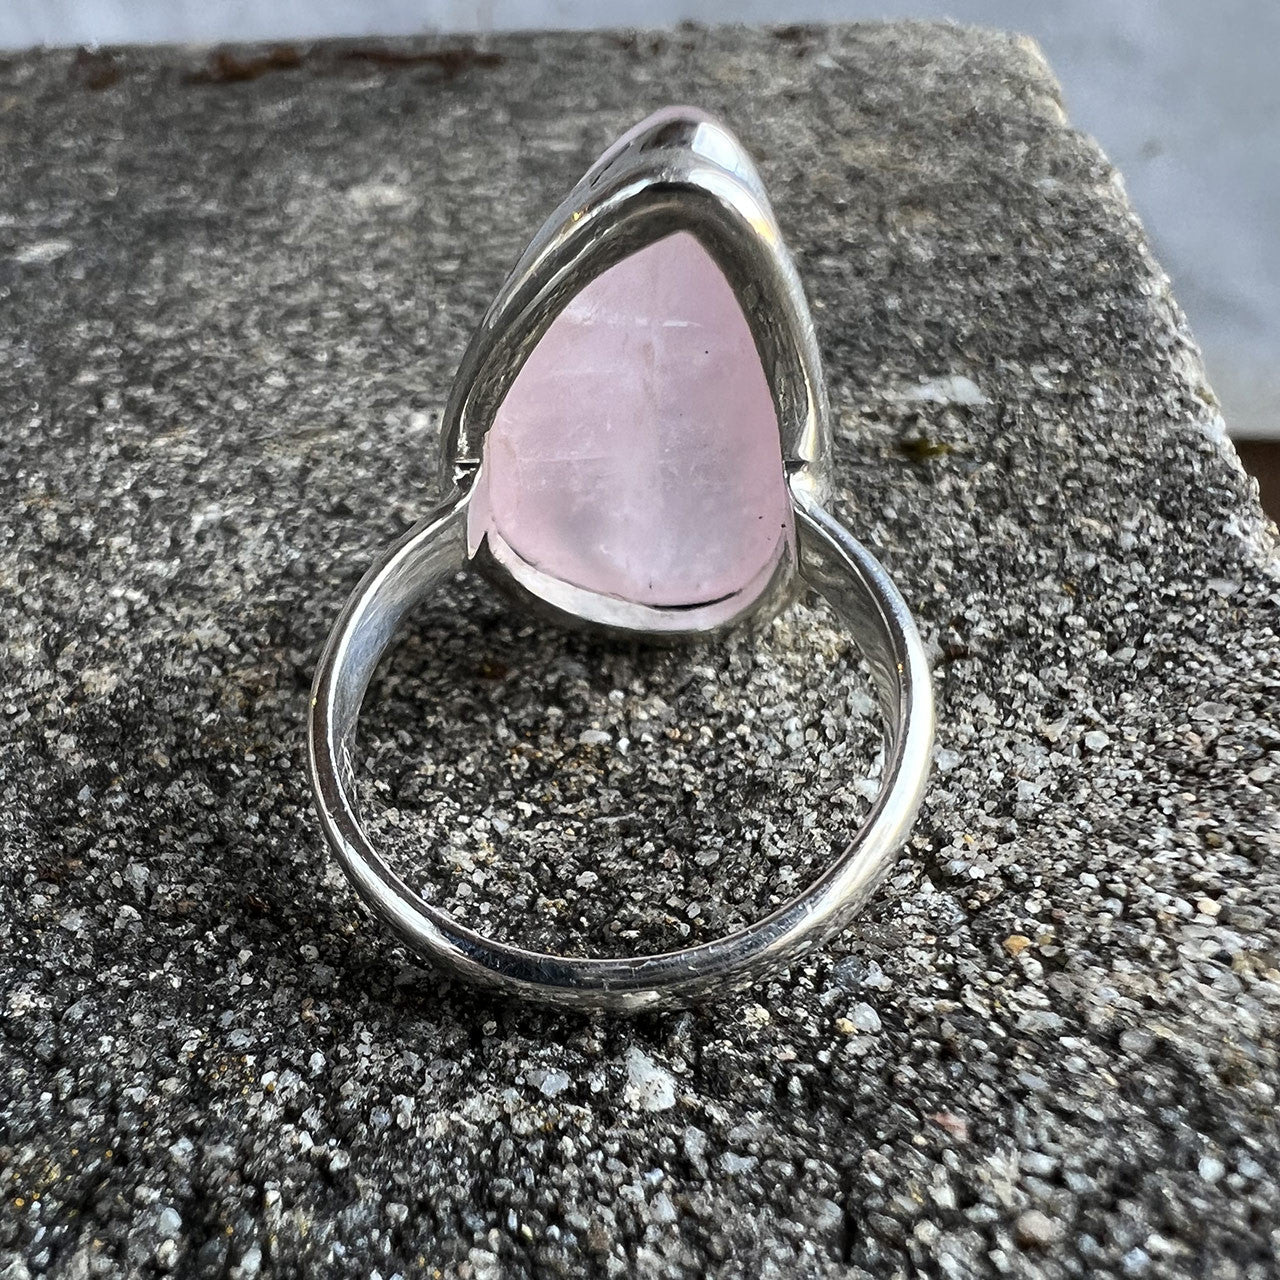 Rose Quartz is a popular crystal that serves positive energy of love, compassion, peace, healing, and comfort. Speaking directly to the heart chakra, the stone circulates divine loving energy throughout one's entire aura, allowing a full capacity to truly give and receive love. 